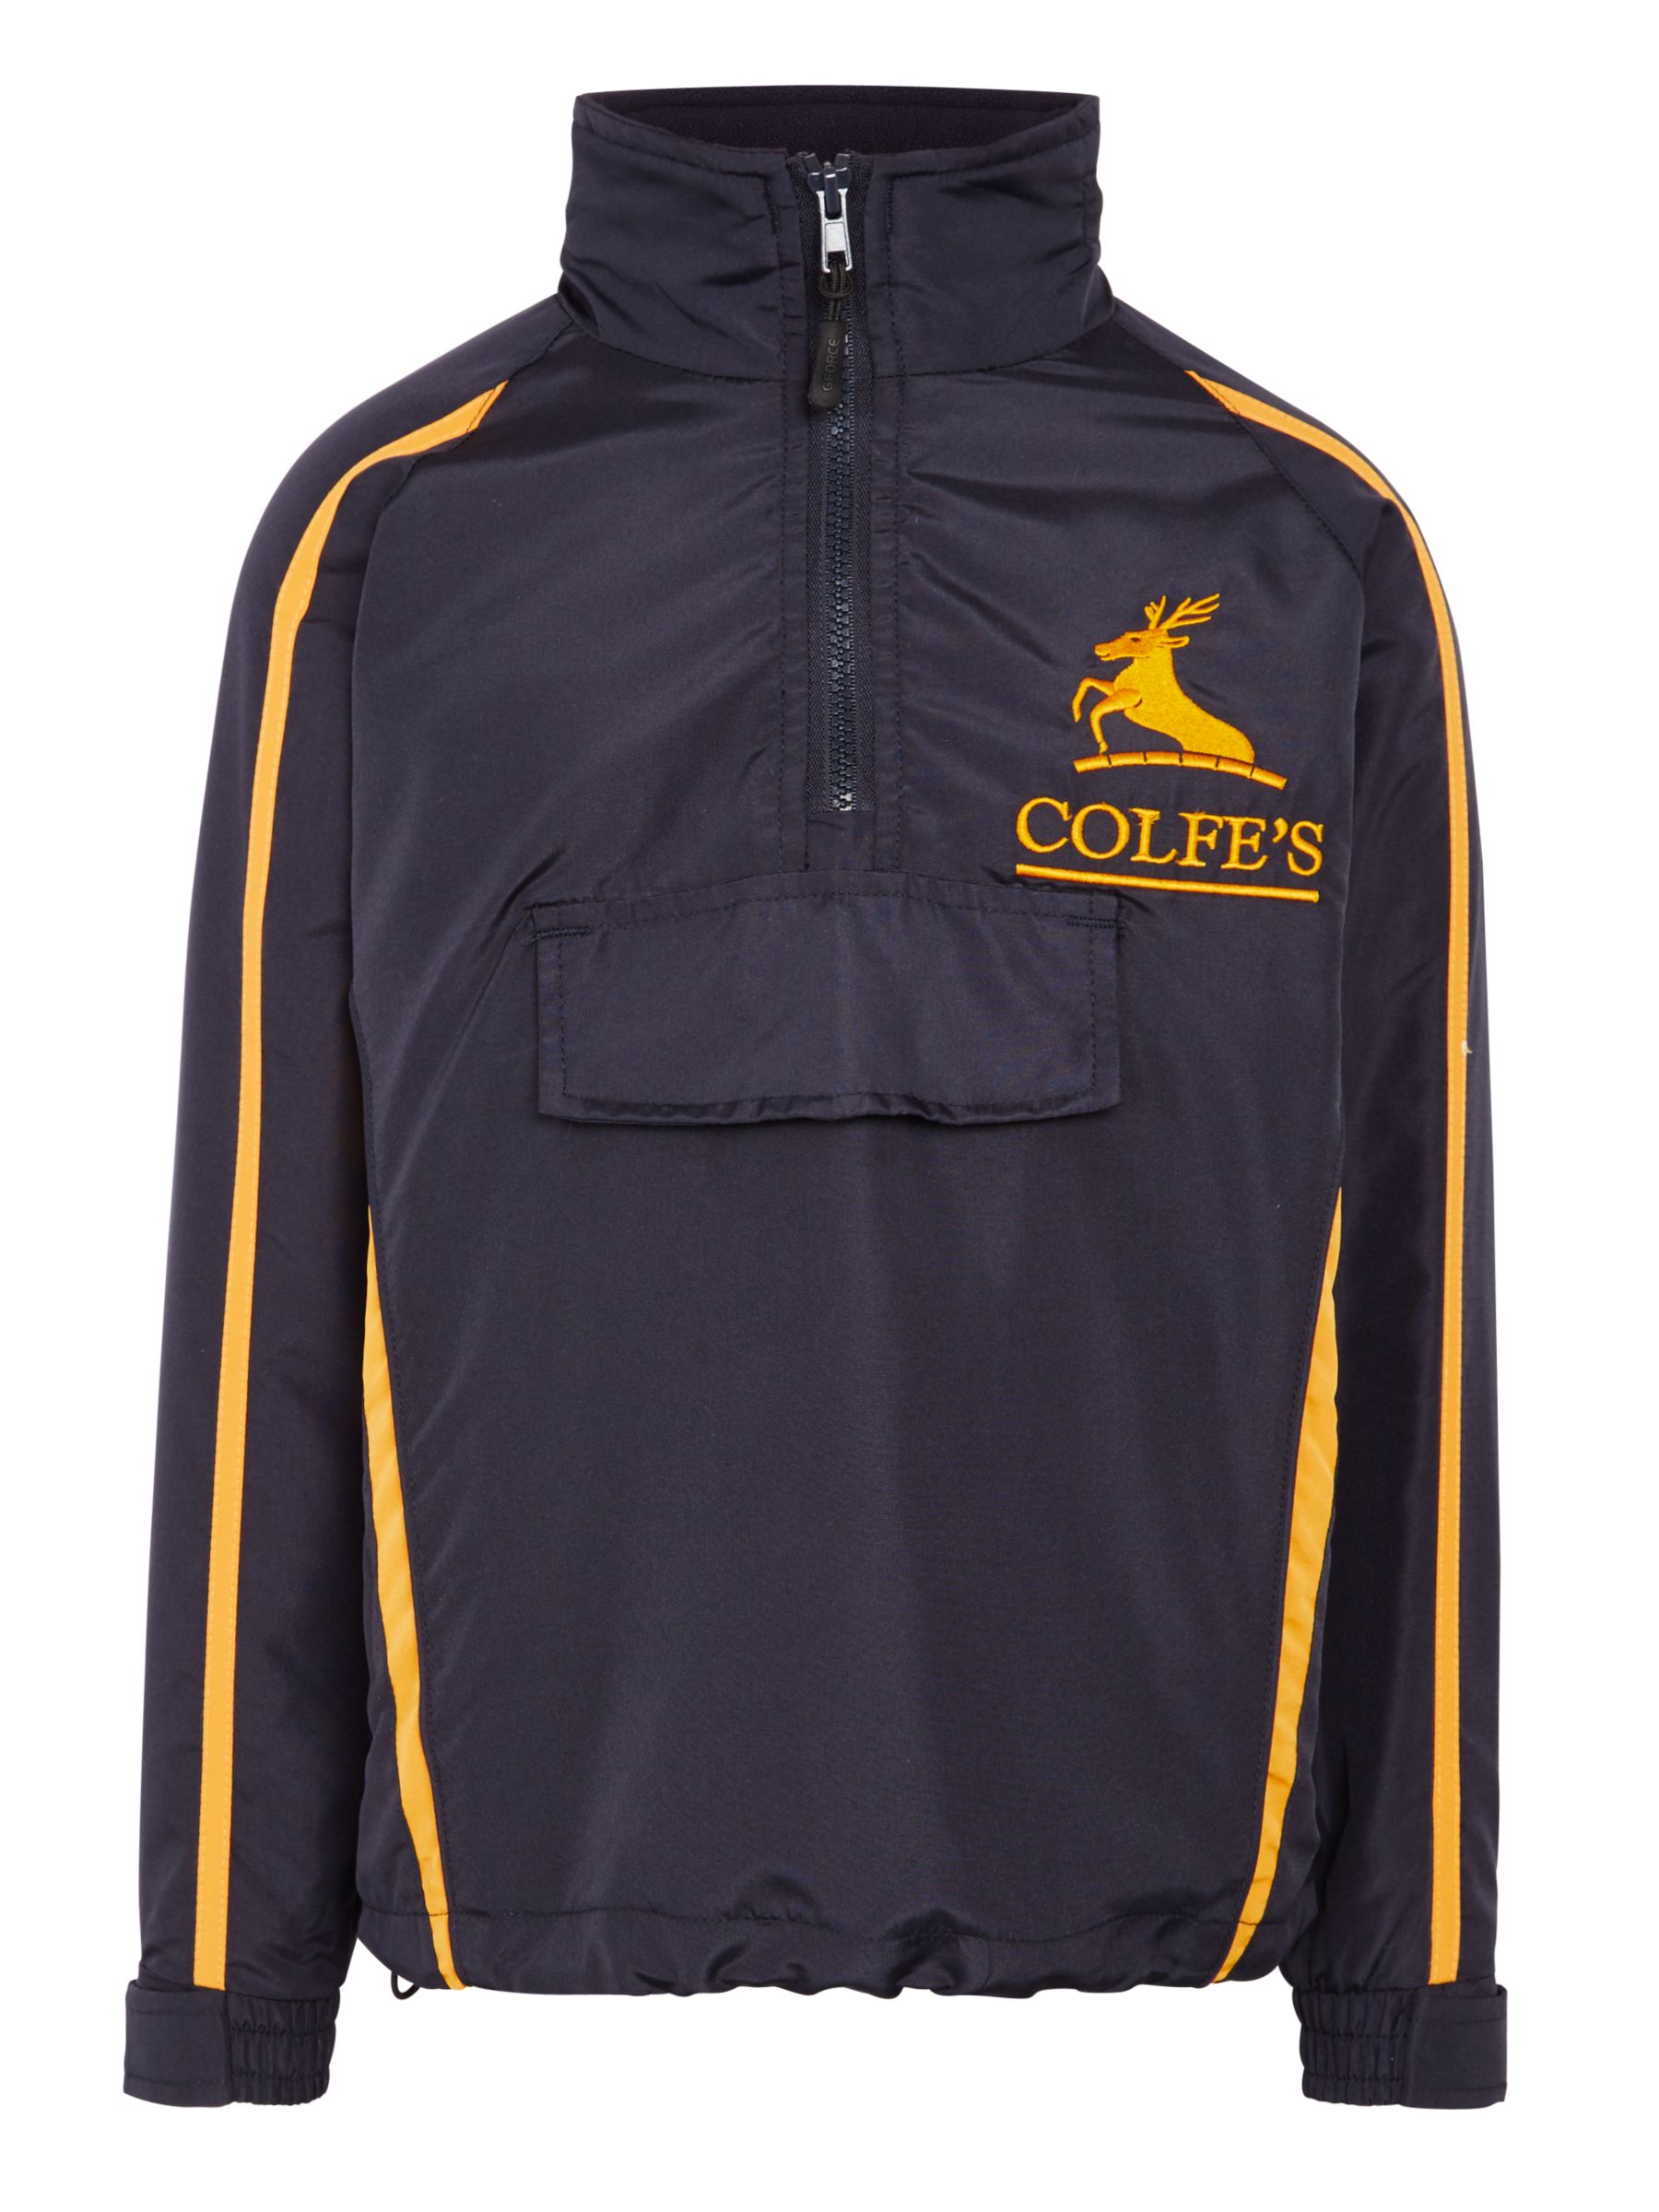 Colfe's School Tracksuit Top, Navy Blue/Yellow at John Lewis & Partners